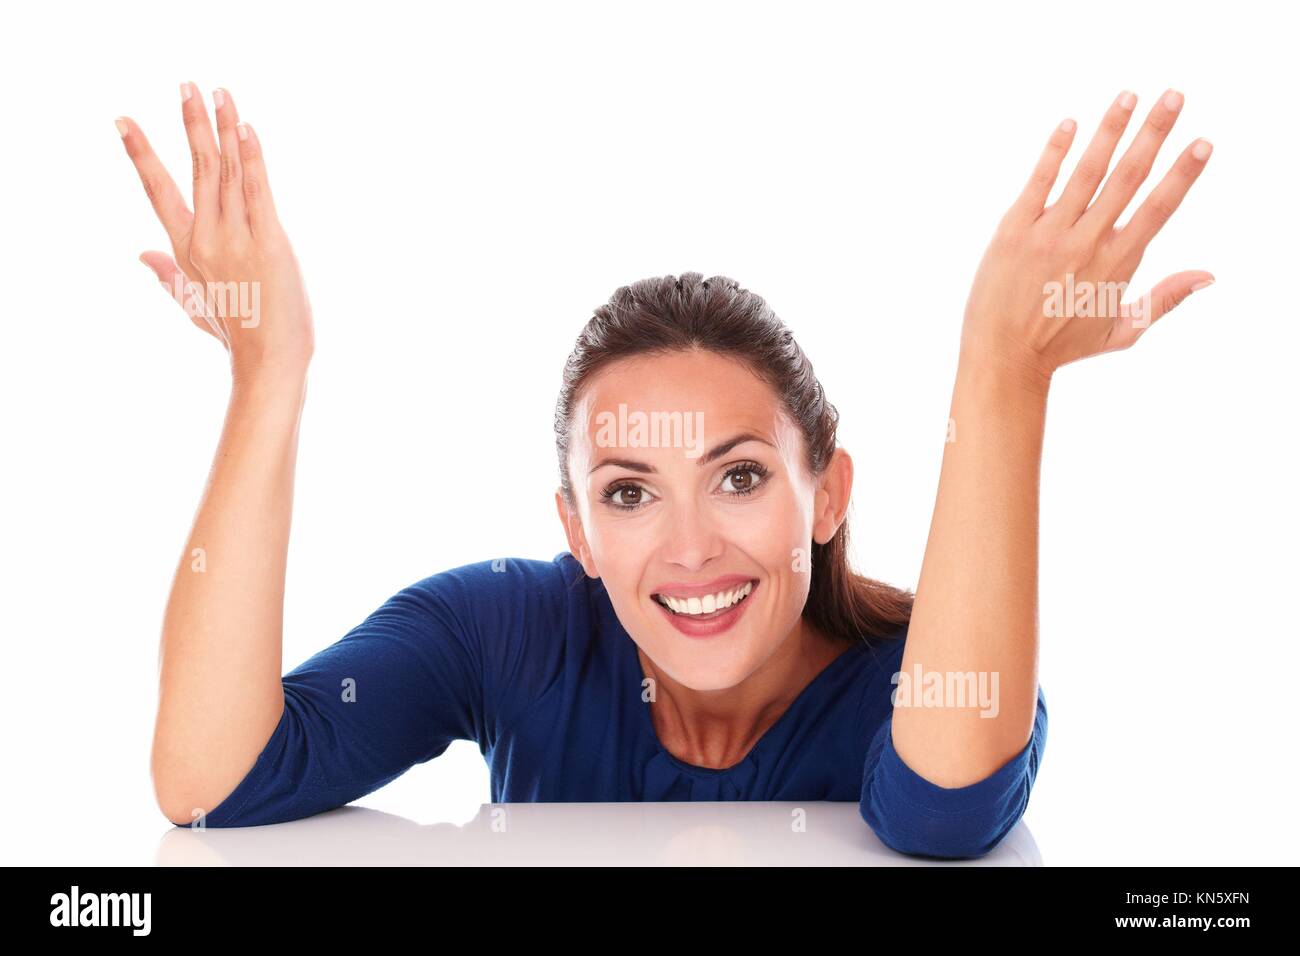 Happy brunette with hands gesturing excitement while looking at you in white background. Stock Photo